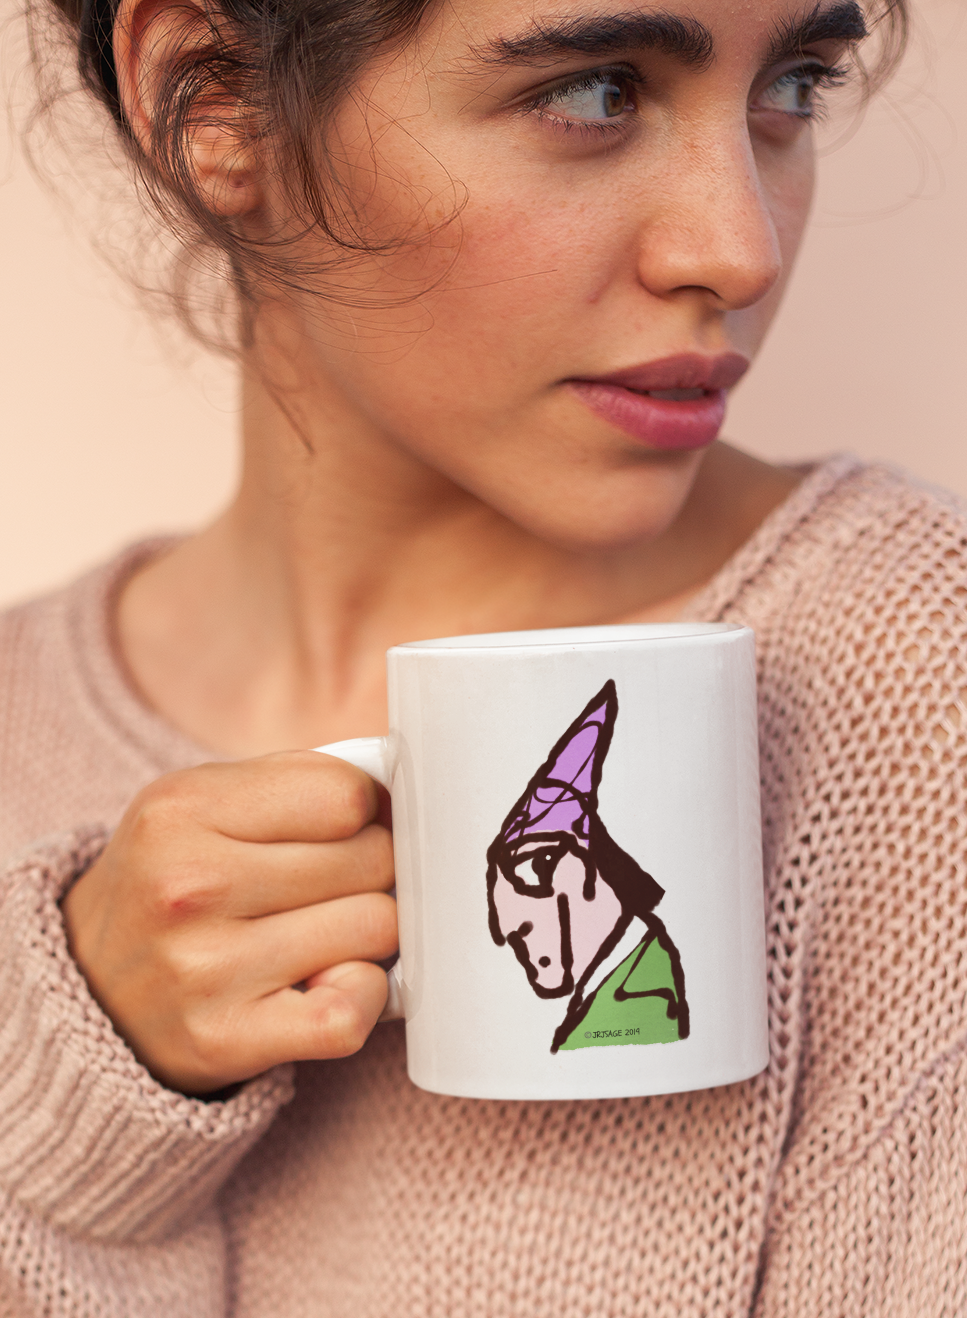 Young woman holding a ceramic white mug by Hector and Bone with cute Polar Bear illustration